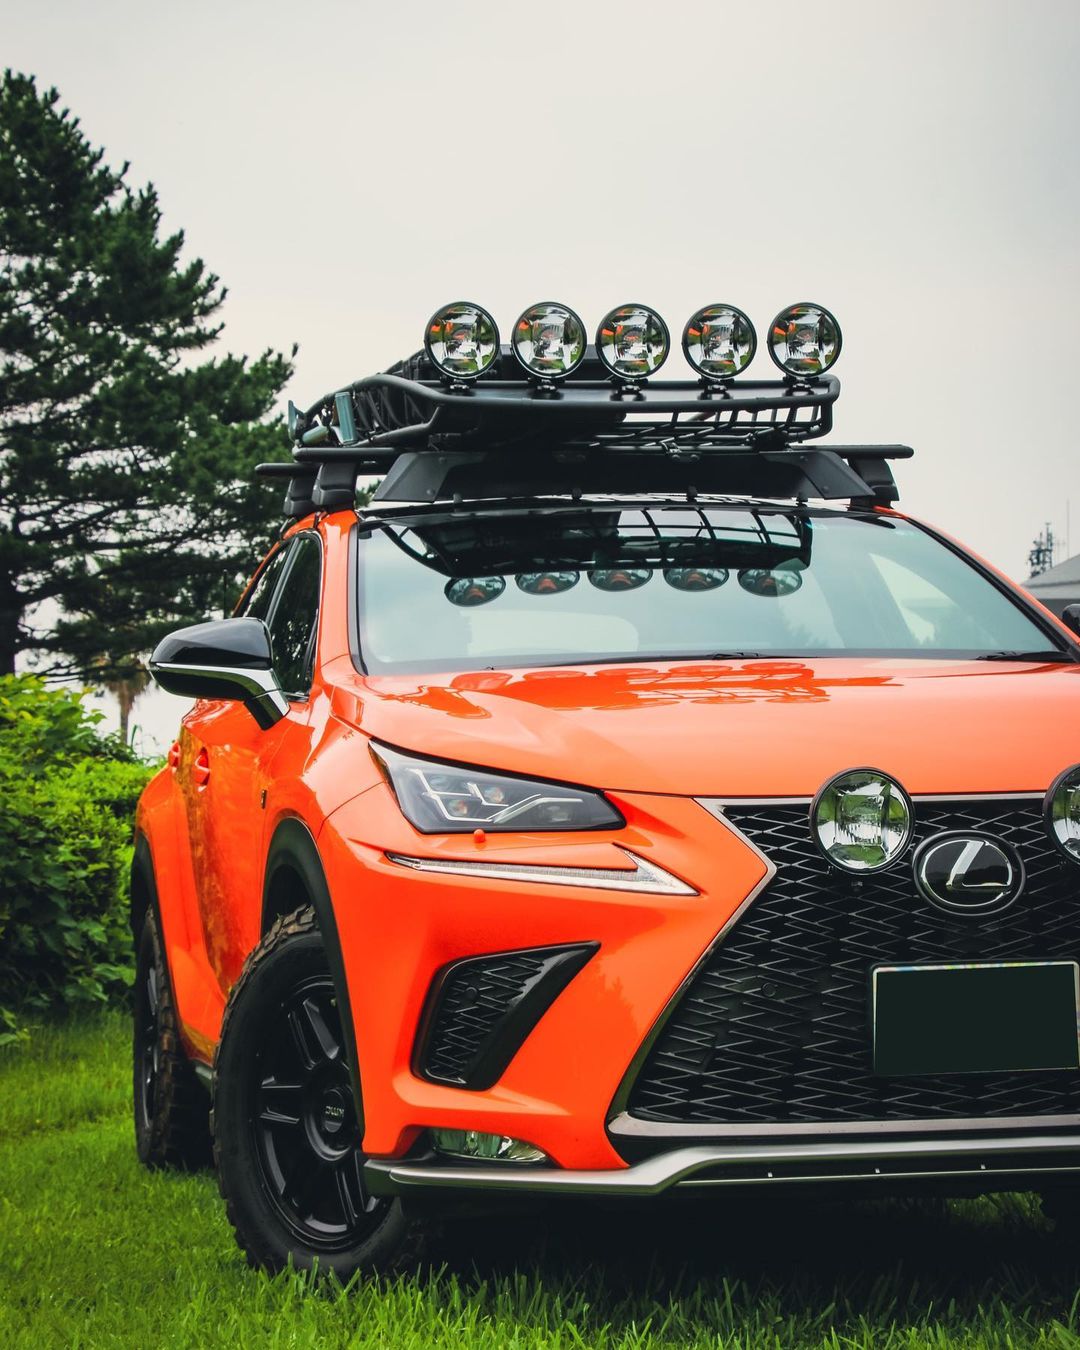 Lexus NX offroad mods and accessories - Thule Roof rack and IPS lights